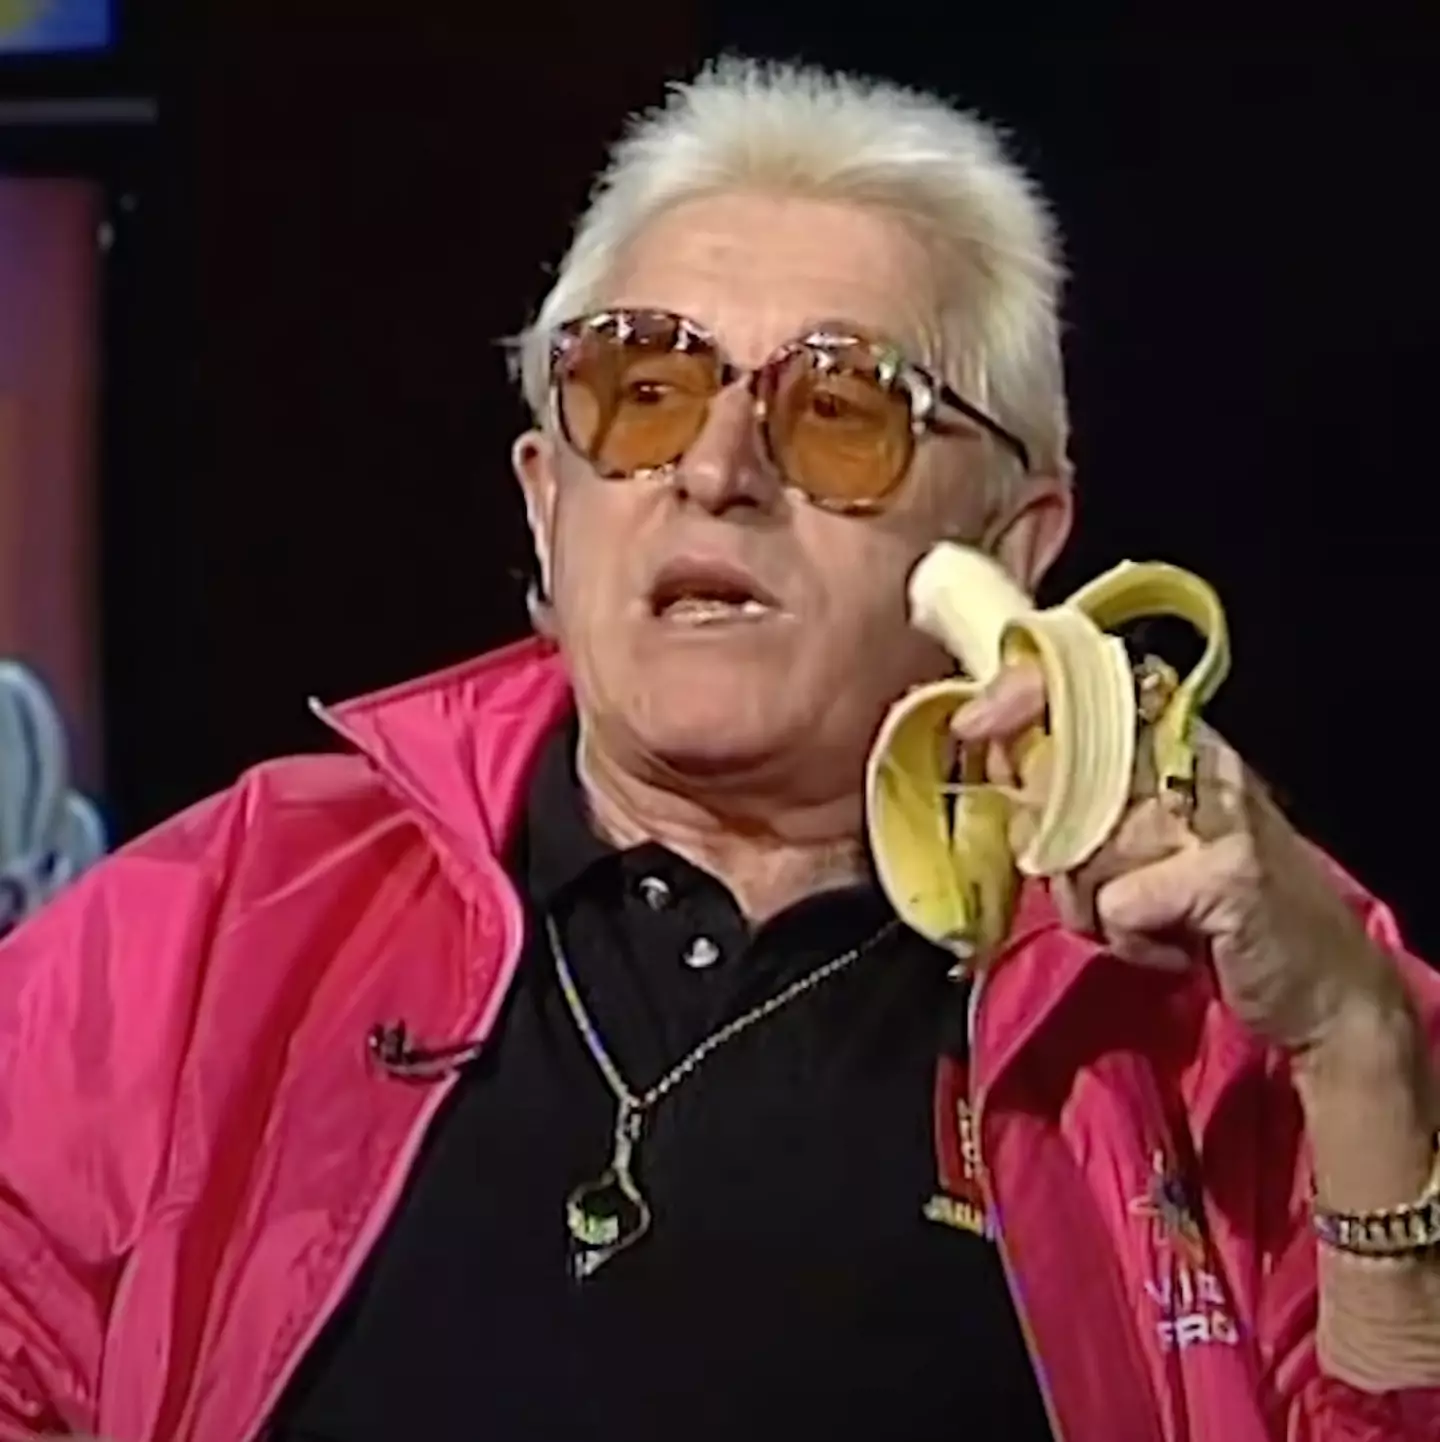 Jimmy Savile avoided questions about his love life.